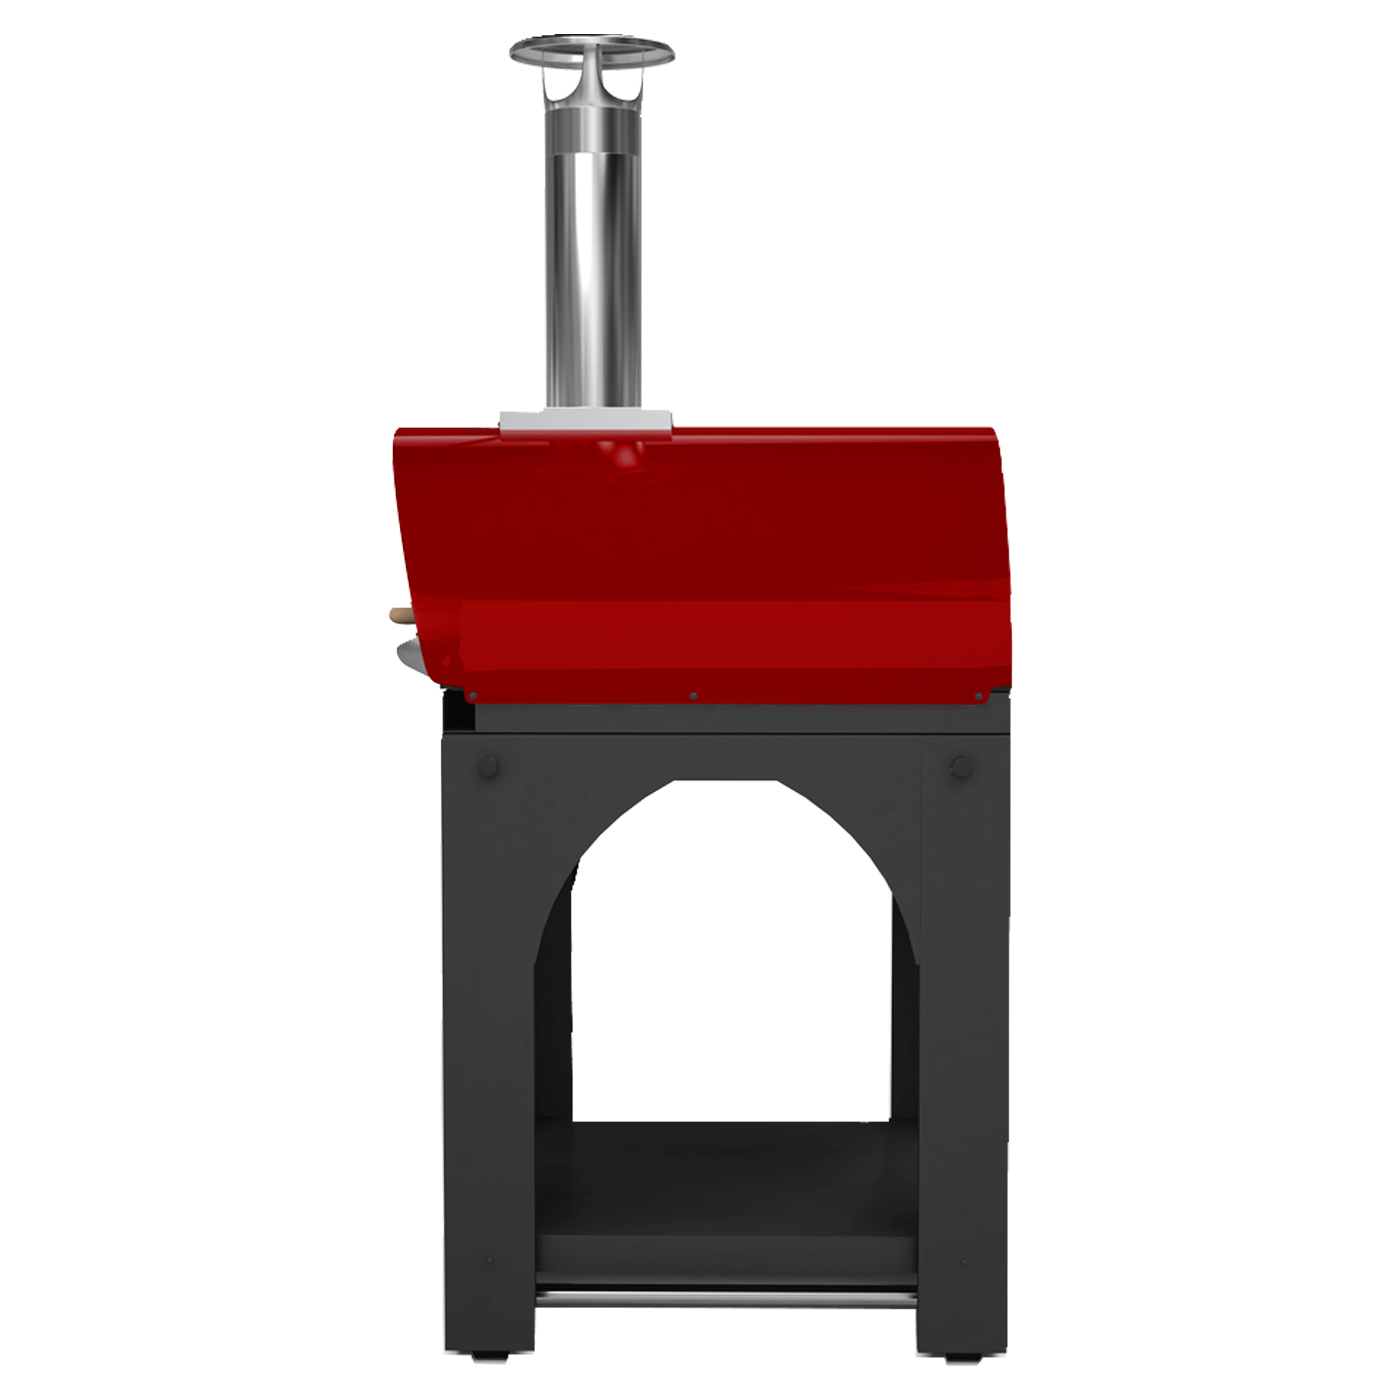 Belforno Piccolo Portable Wood-fired Pizza Oven - Kitchen King Direct